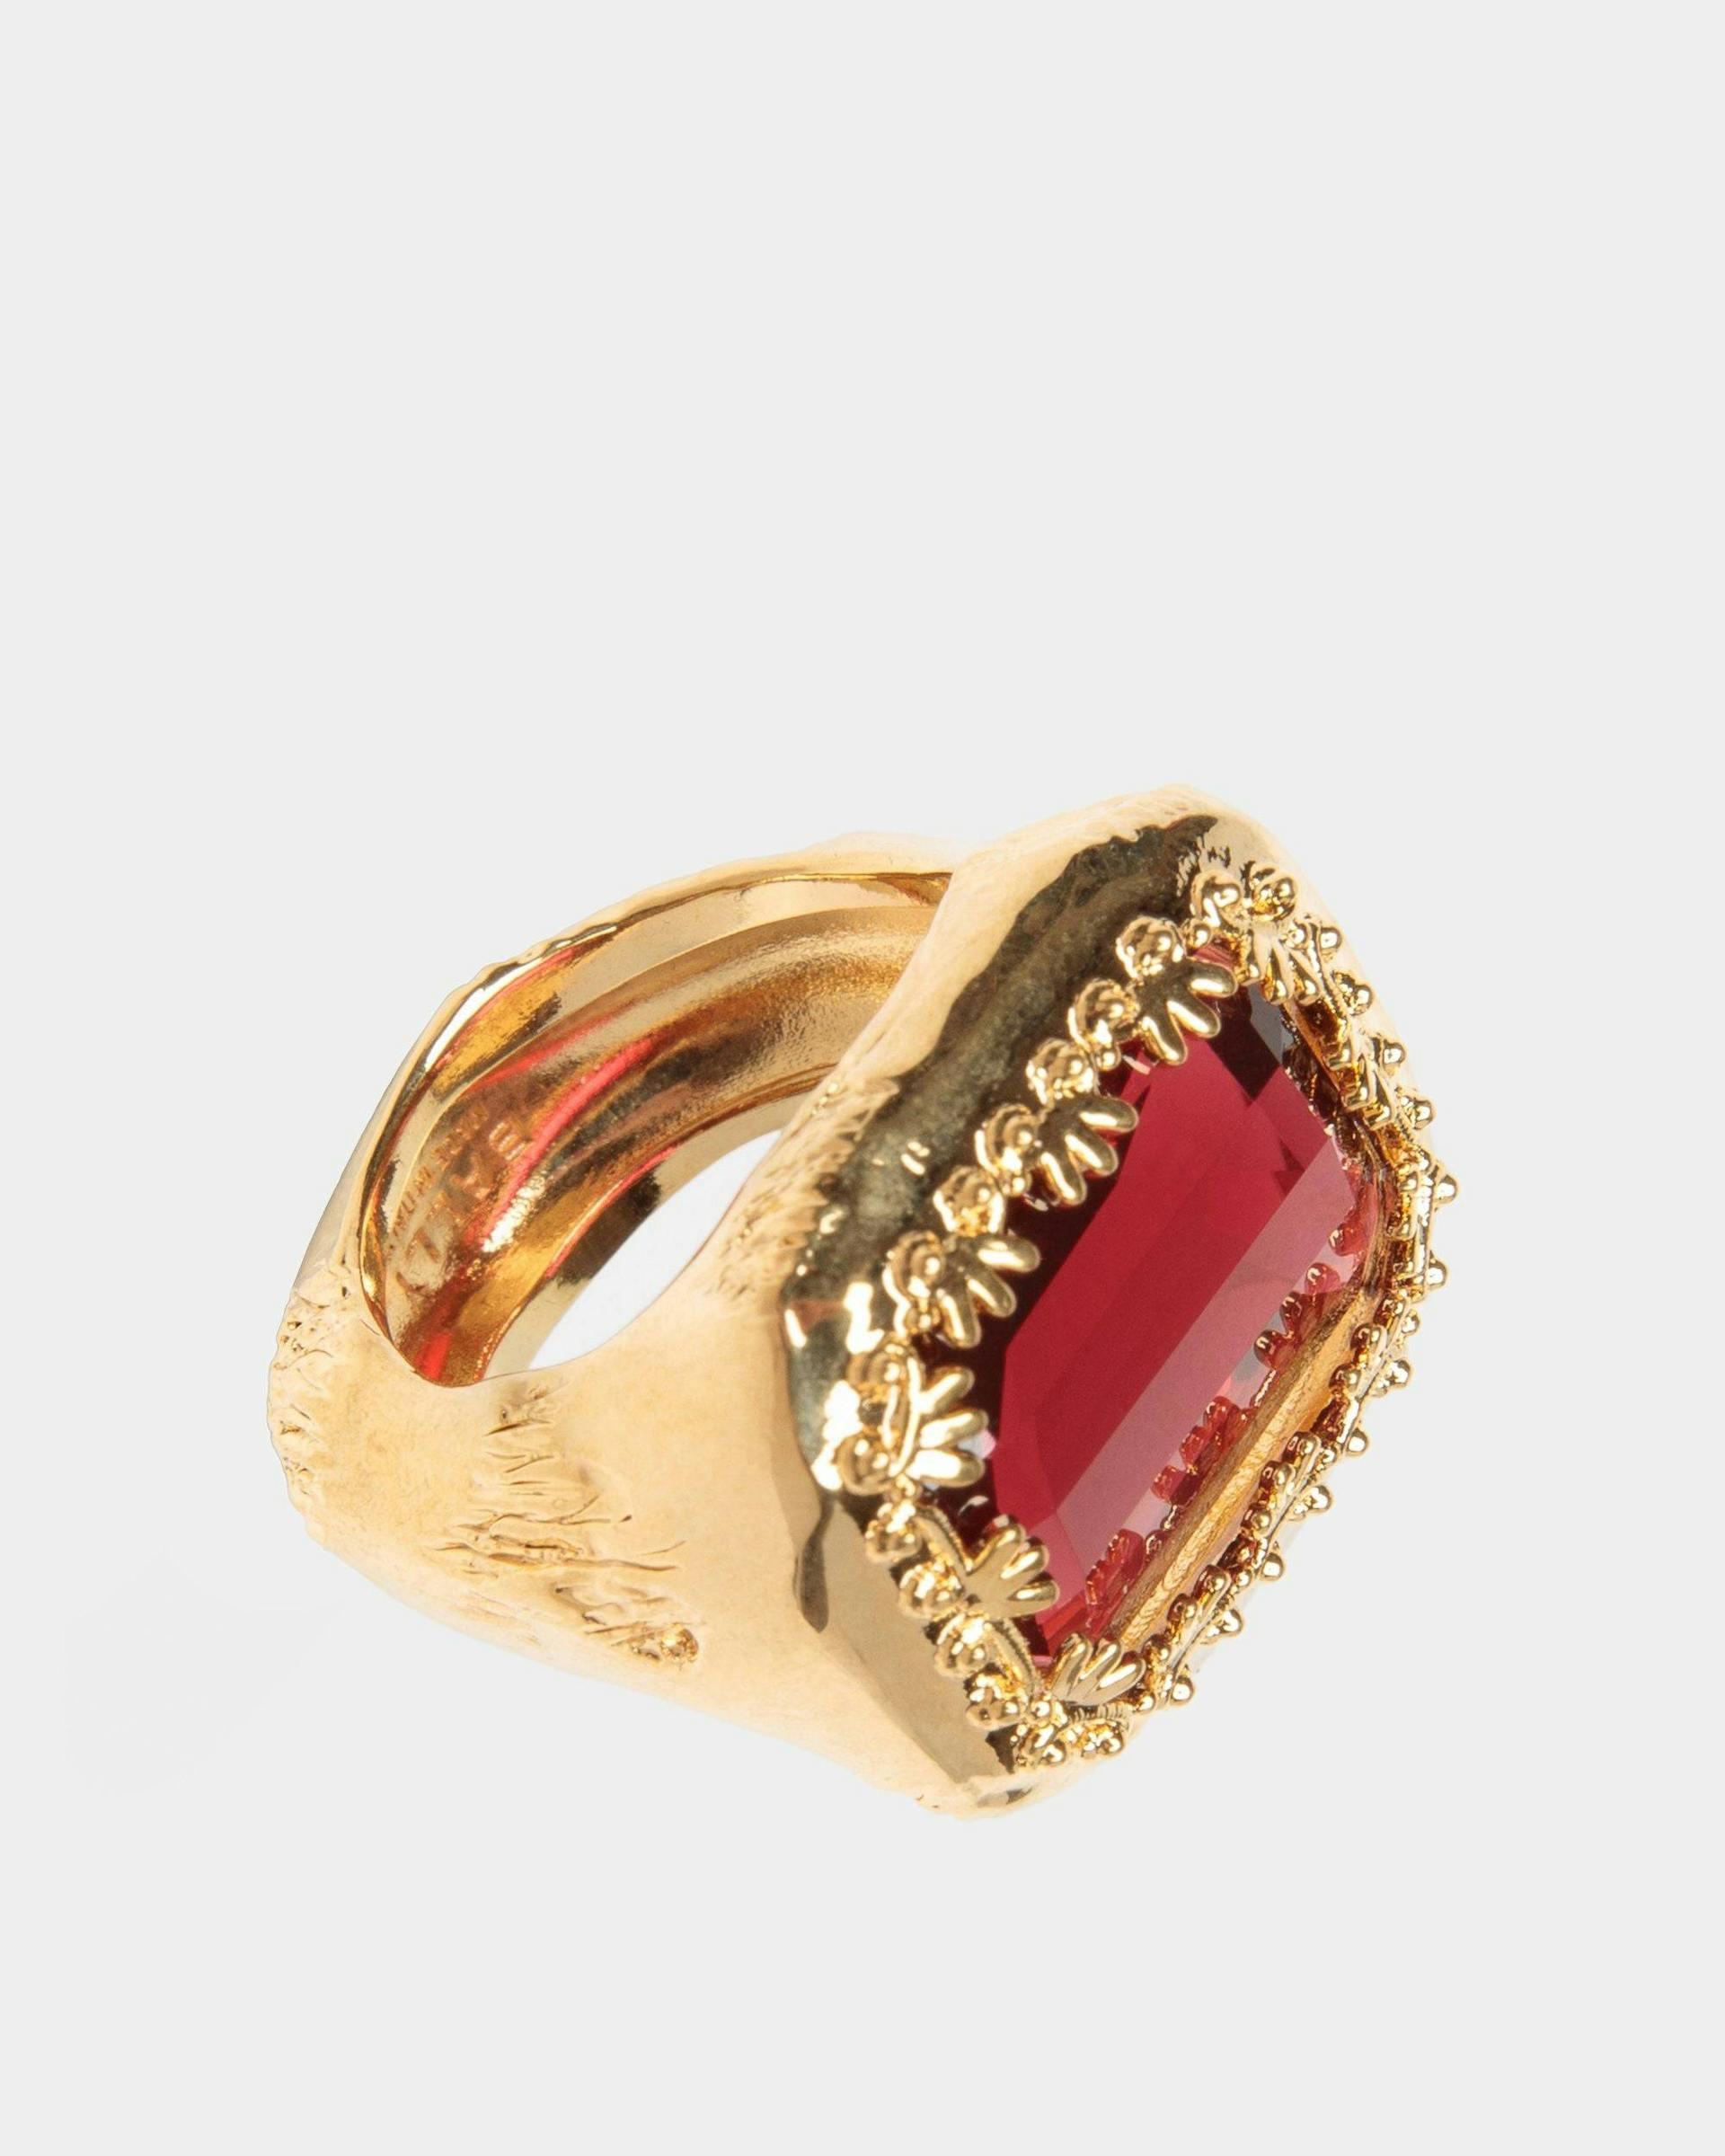 Baroque Ring In Hammered Gold - Women's - Bally - 01